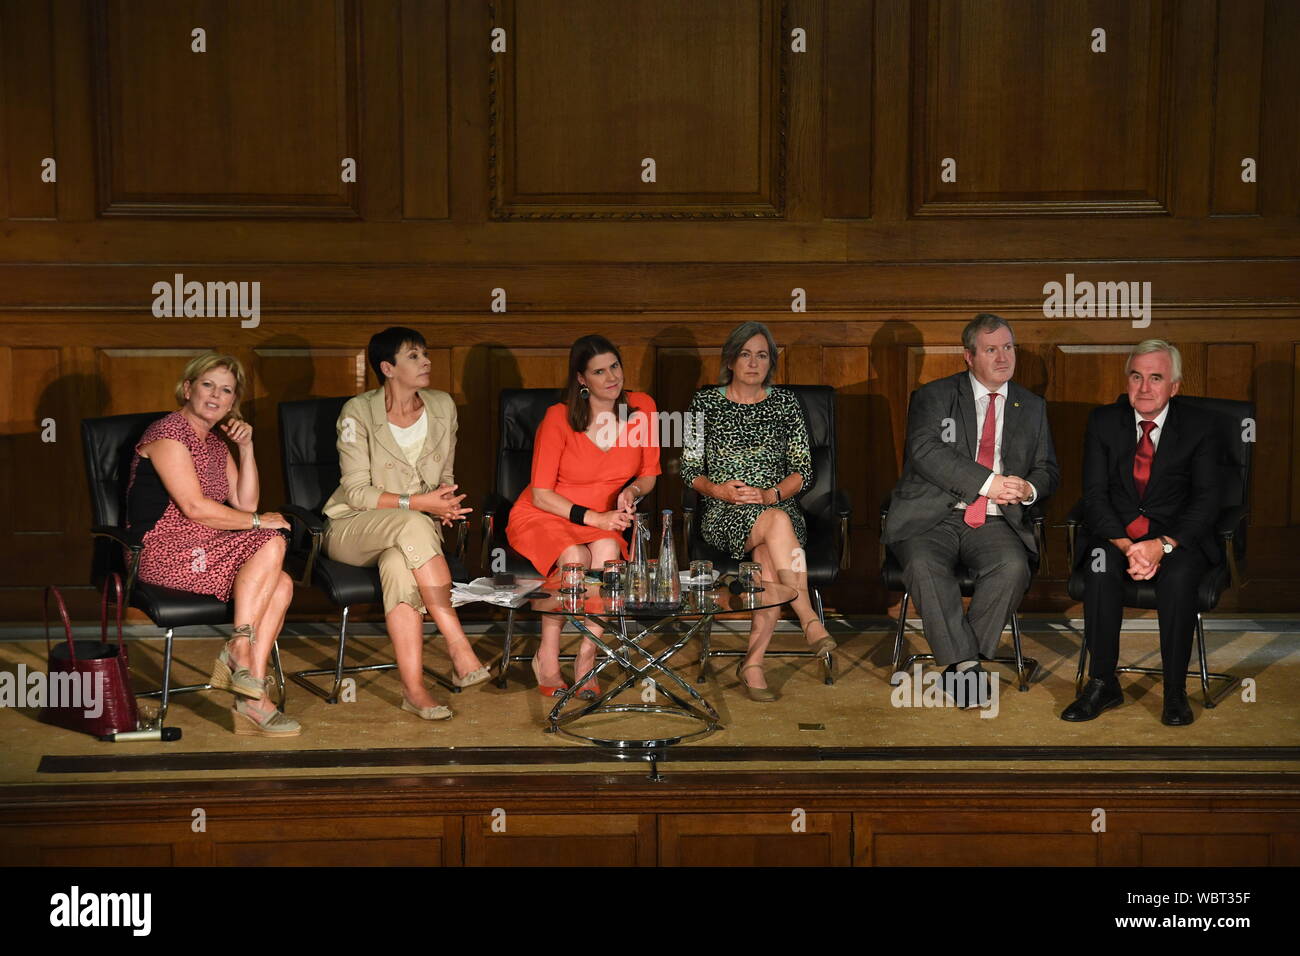 (left to right) Anna Soubry, Caroline Lucas, Jo Swinson, Liz Saville Roberts, Ian Blackford and John McDonnell during a meeting of a cross-party group of MPs at Church House, Westminster, where they will sign a declaration saying they will continue to meet as an alternative House of Commons if Prime Minister Boris Johnson temporarily shuts down Parliament to get a no-deal Brexit through. Stock Photo